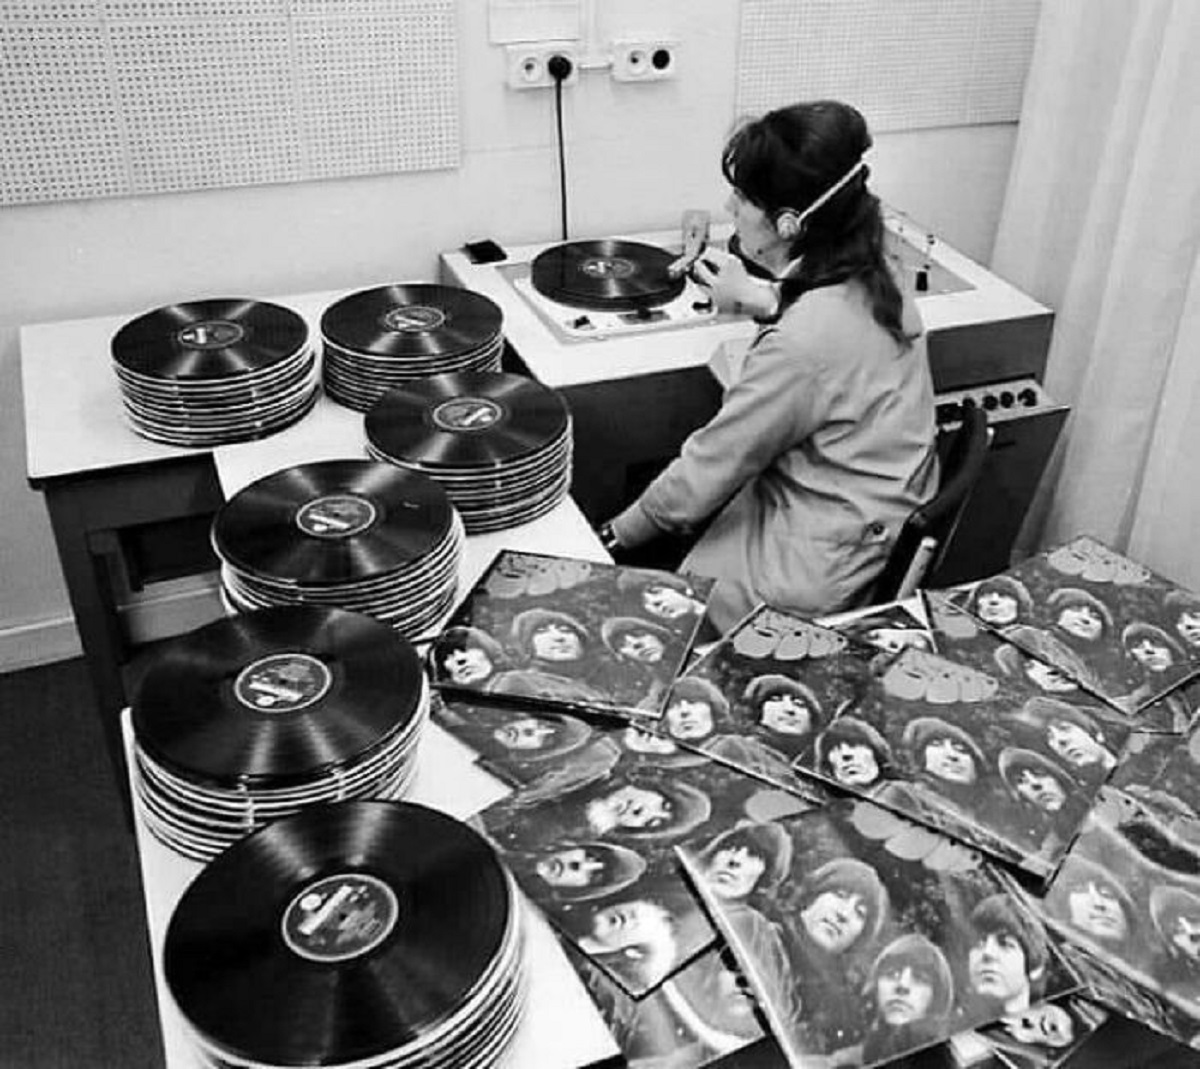 Quality Control At Emi's Vinyl Lp Pressing Plant In London (1965). The Beatles Rubber Soul